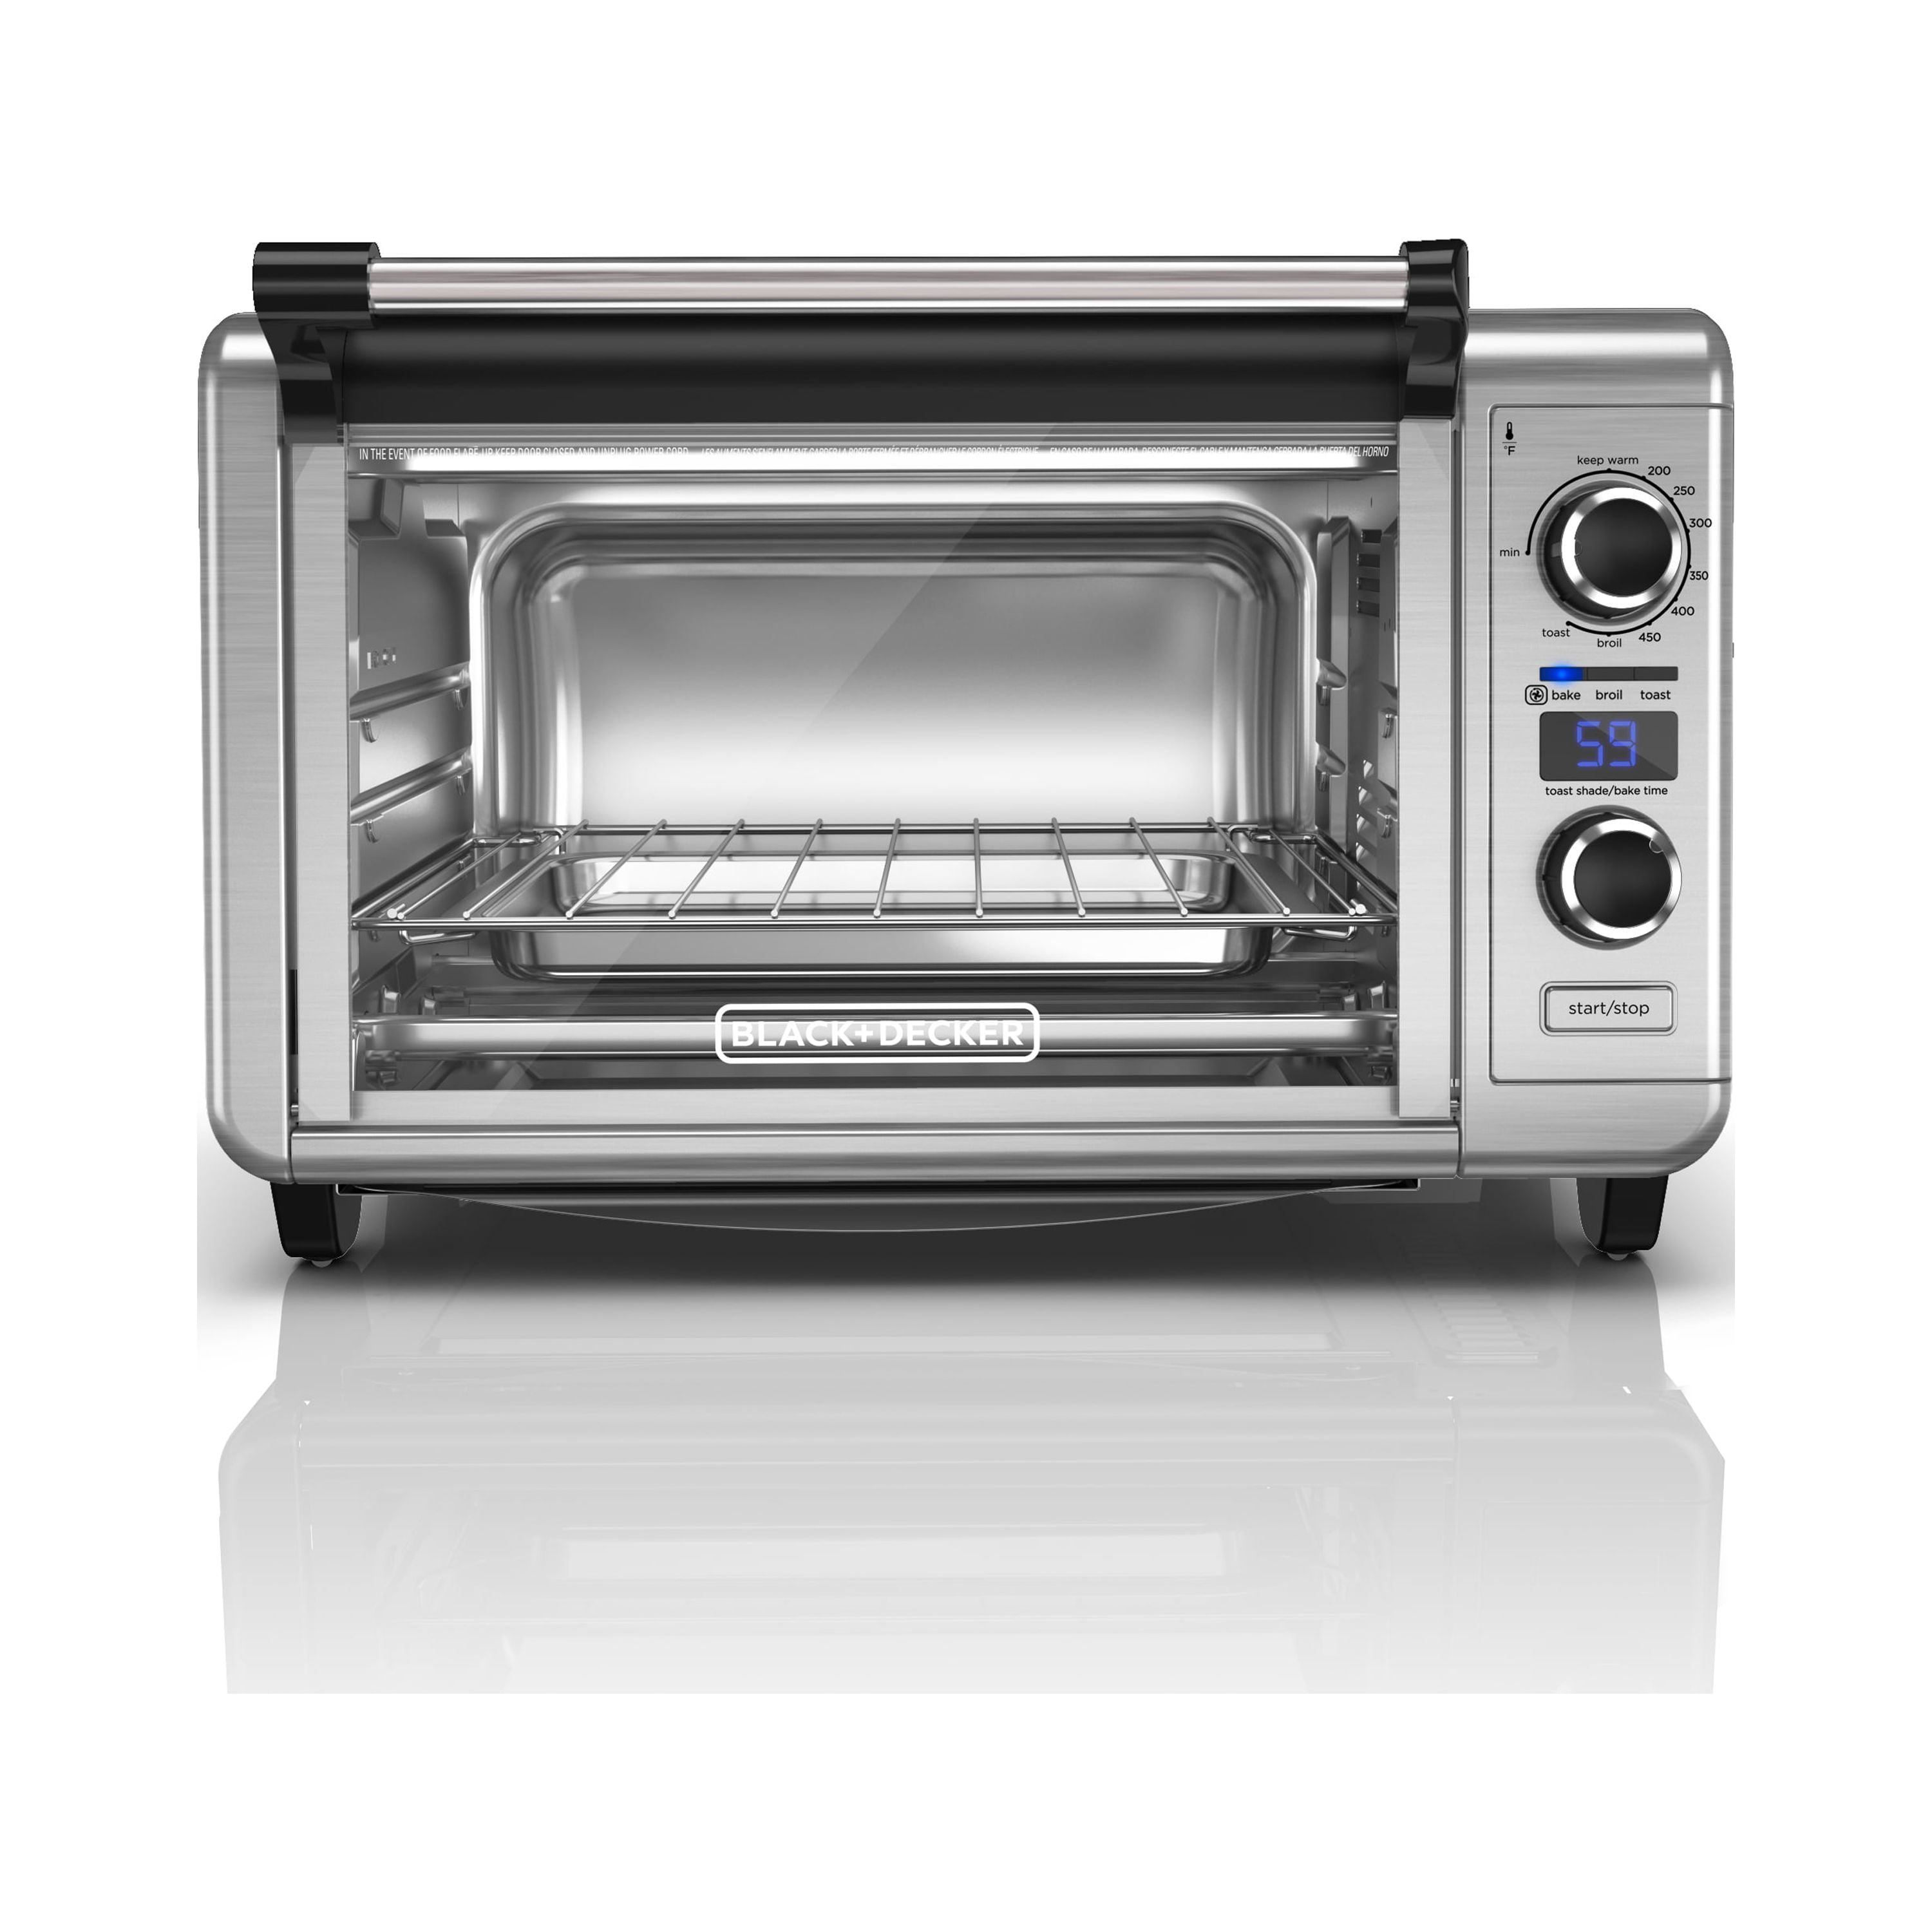 BLACK+DECKER TO3000G 6-Slice 1500W Convection Toaster Oven - Silver for  sale online